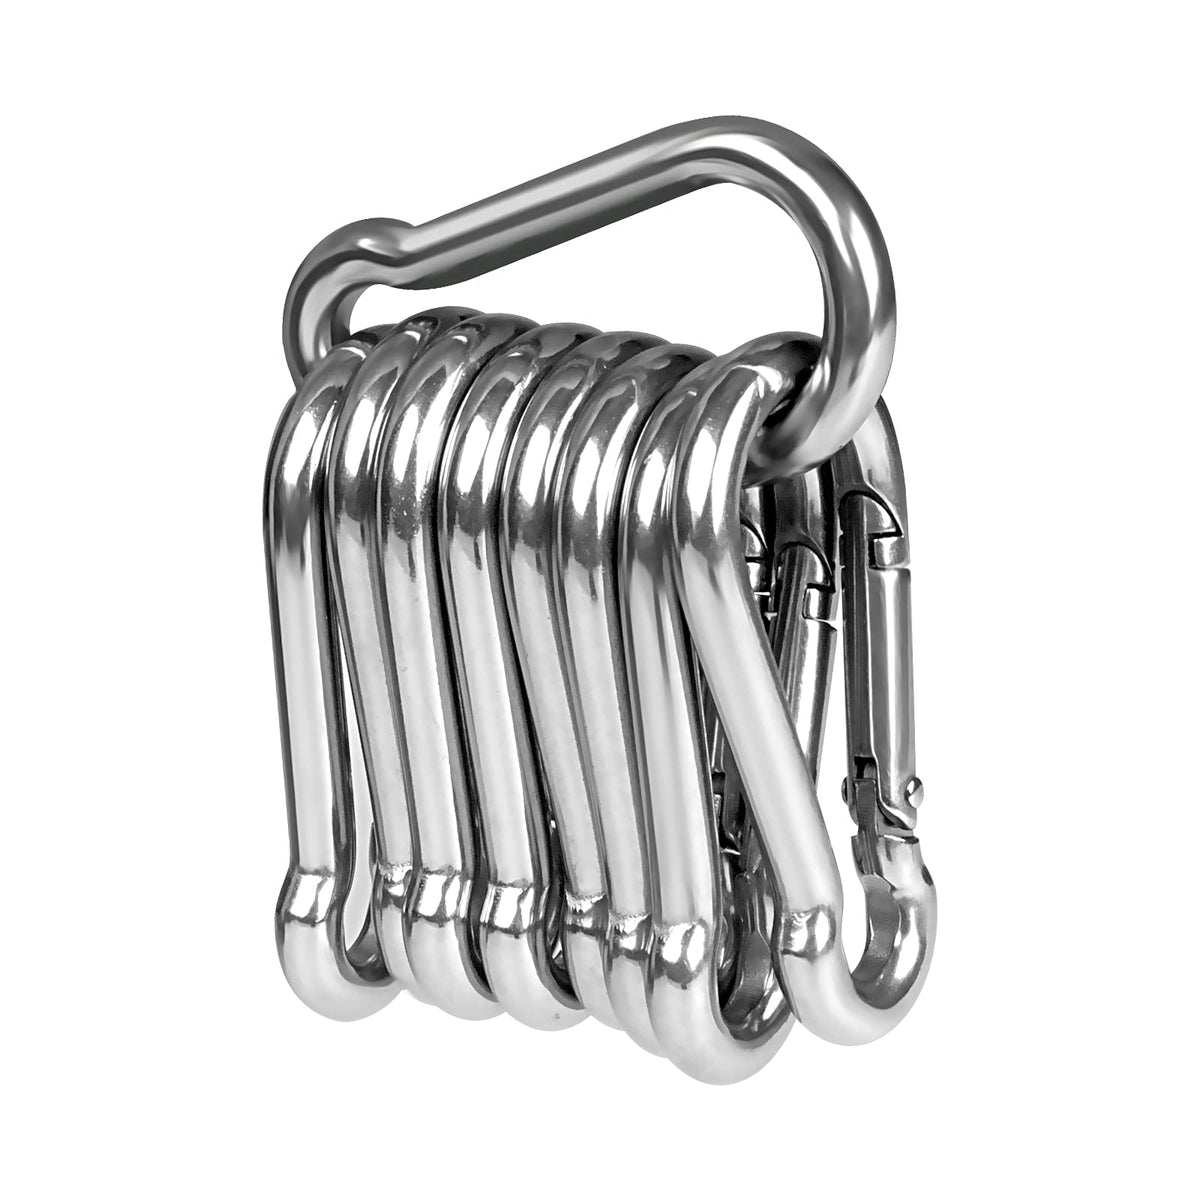 10 x Snap Hooks, LISOPO Carabiner Hooks M4 Heavy Duty 304 Stainless Steel, Small Carabiner Snap Hooks Keychain Clips for Outdoor, Camping, Hiking, Hooks for lifting aids and handles with an eyelet…